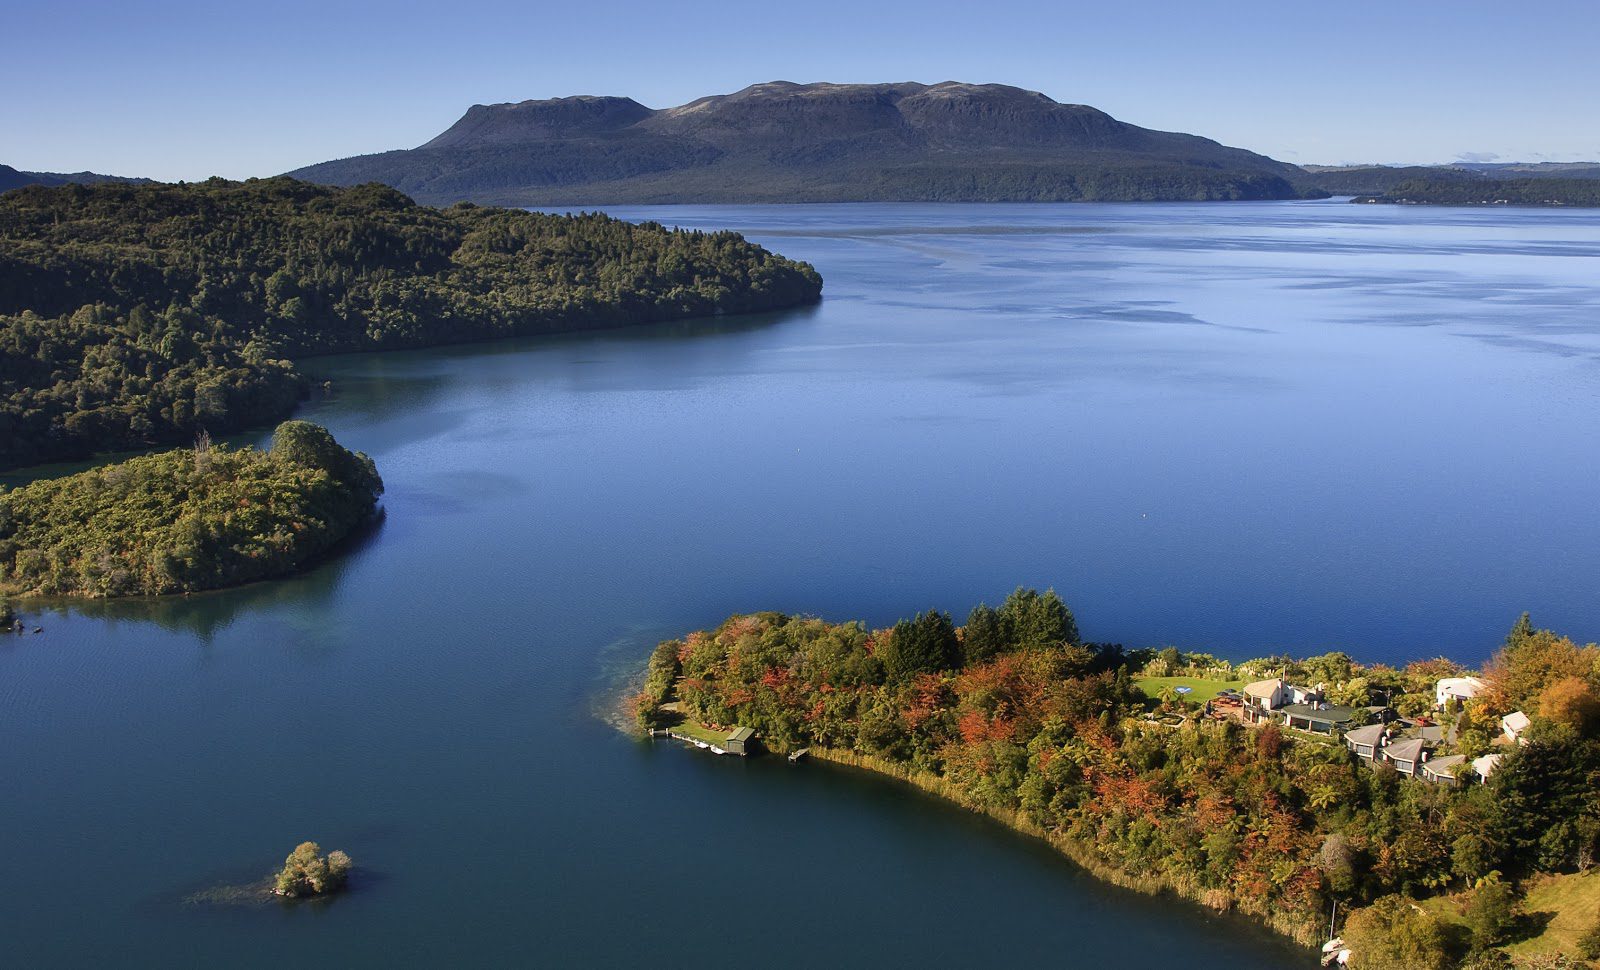 Don’t Miss These 8 Spectacular Luxury Hotels in New Zealand, Island